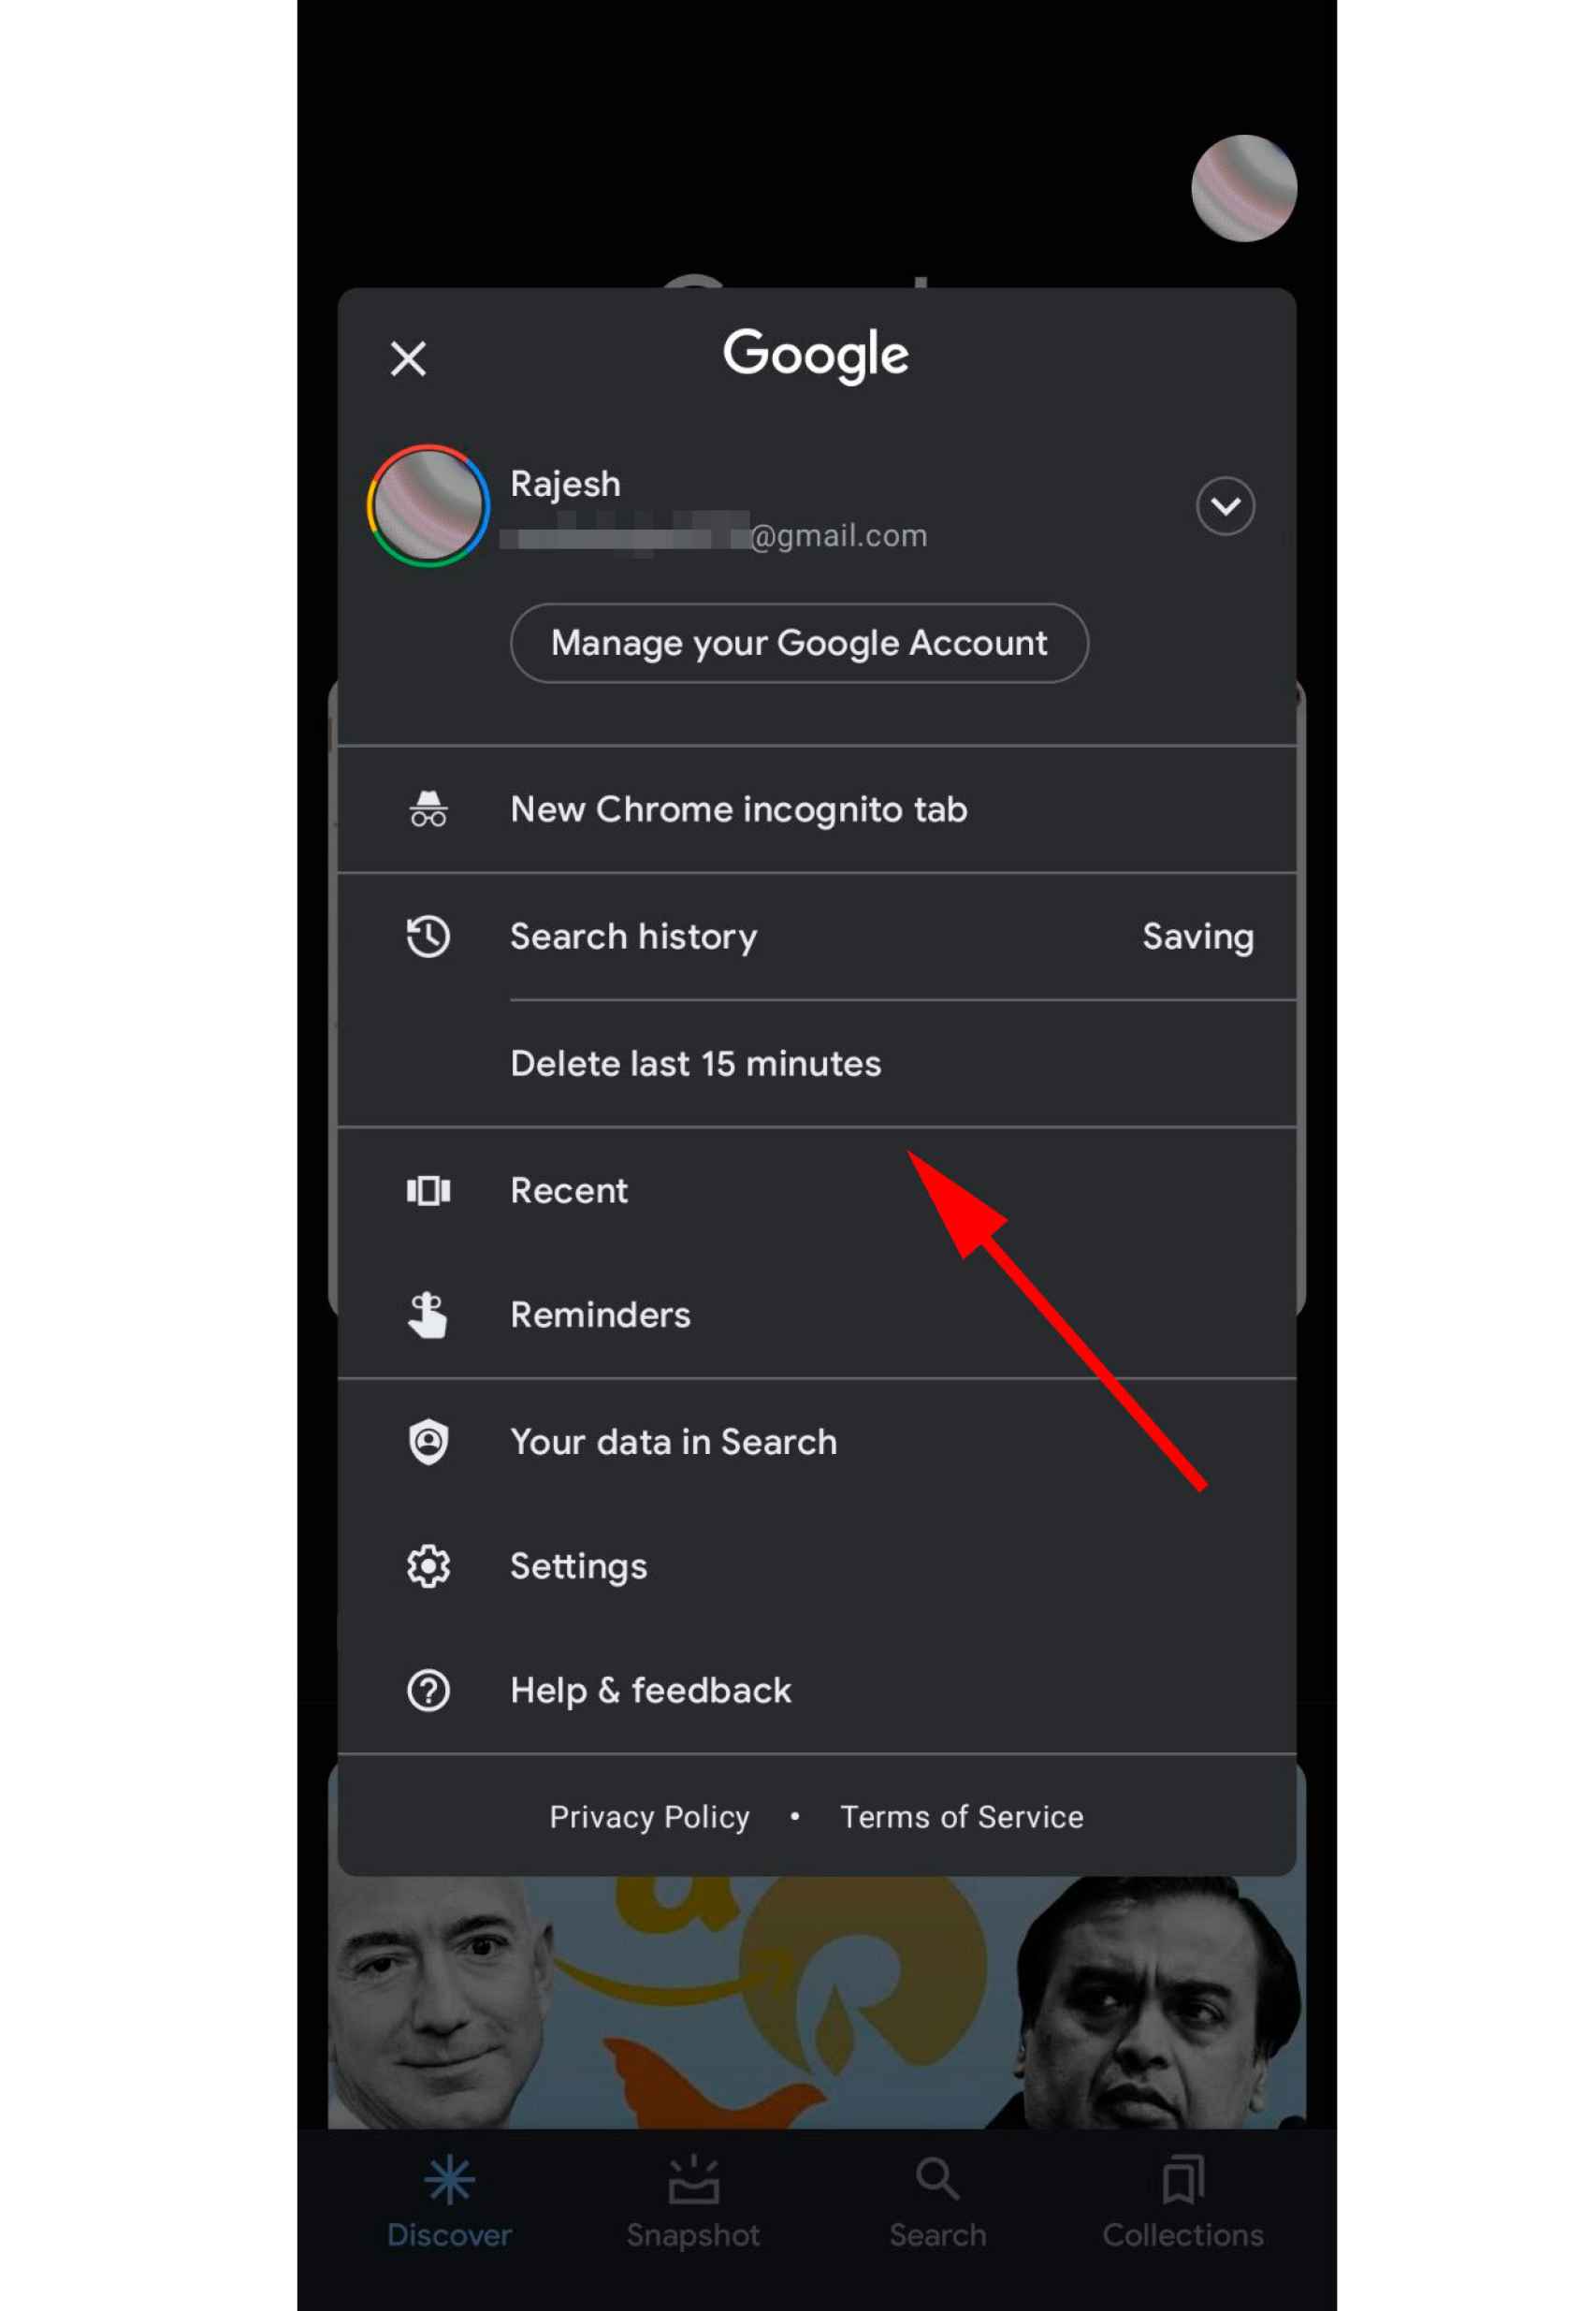 New delete function of the last 15 minutes of searches